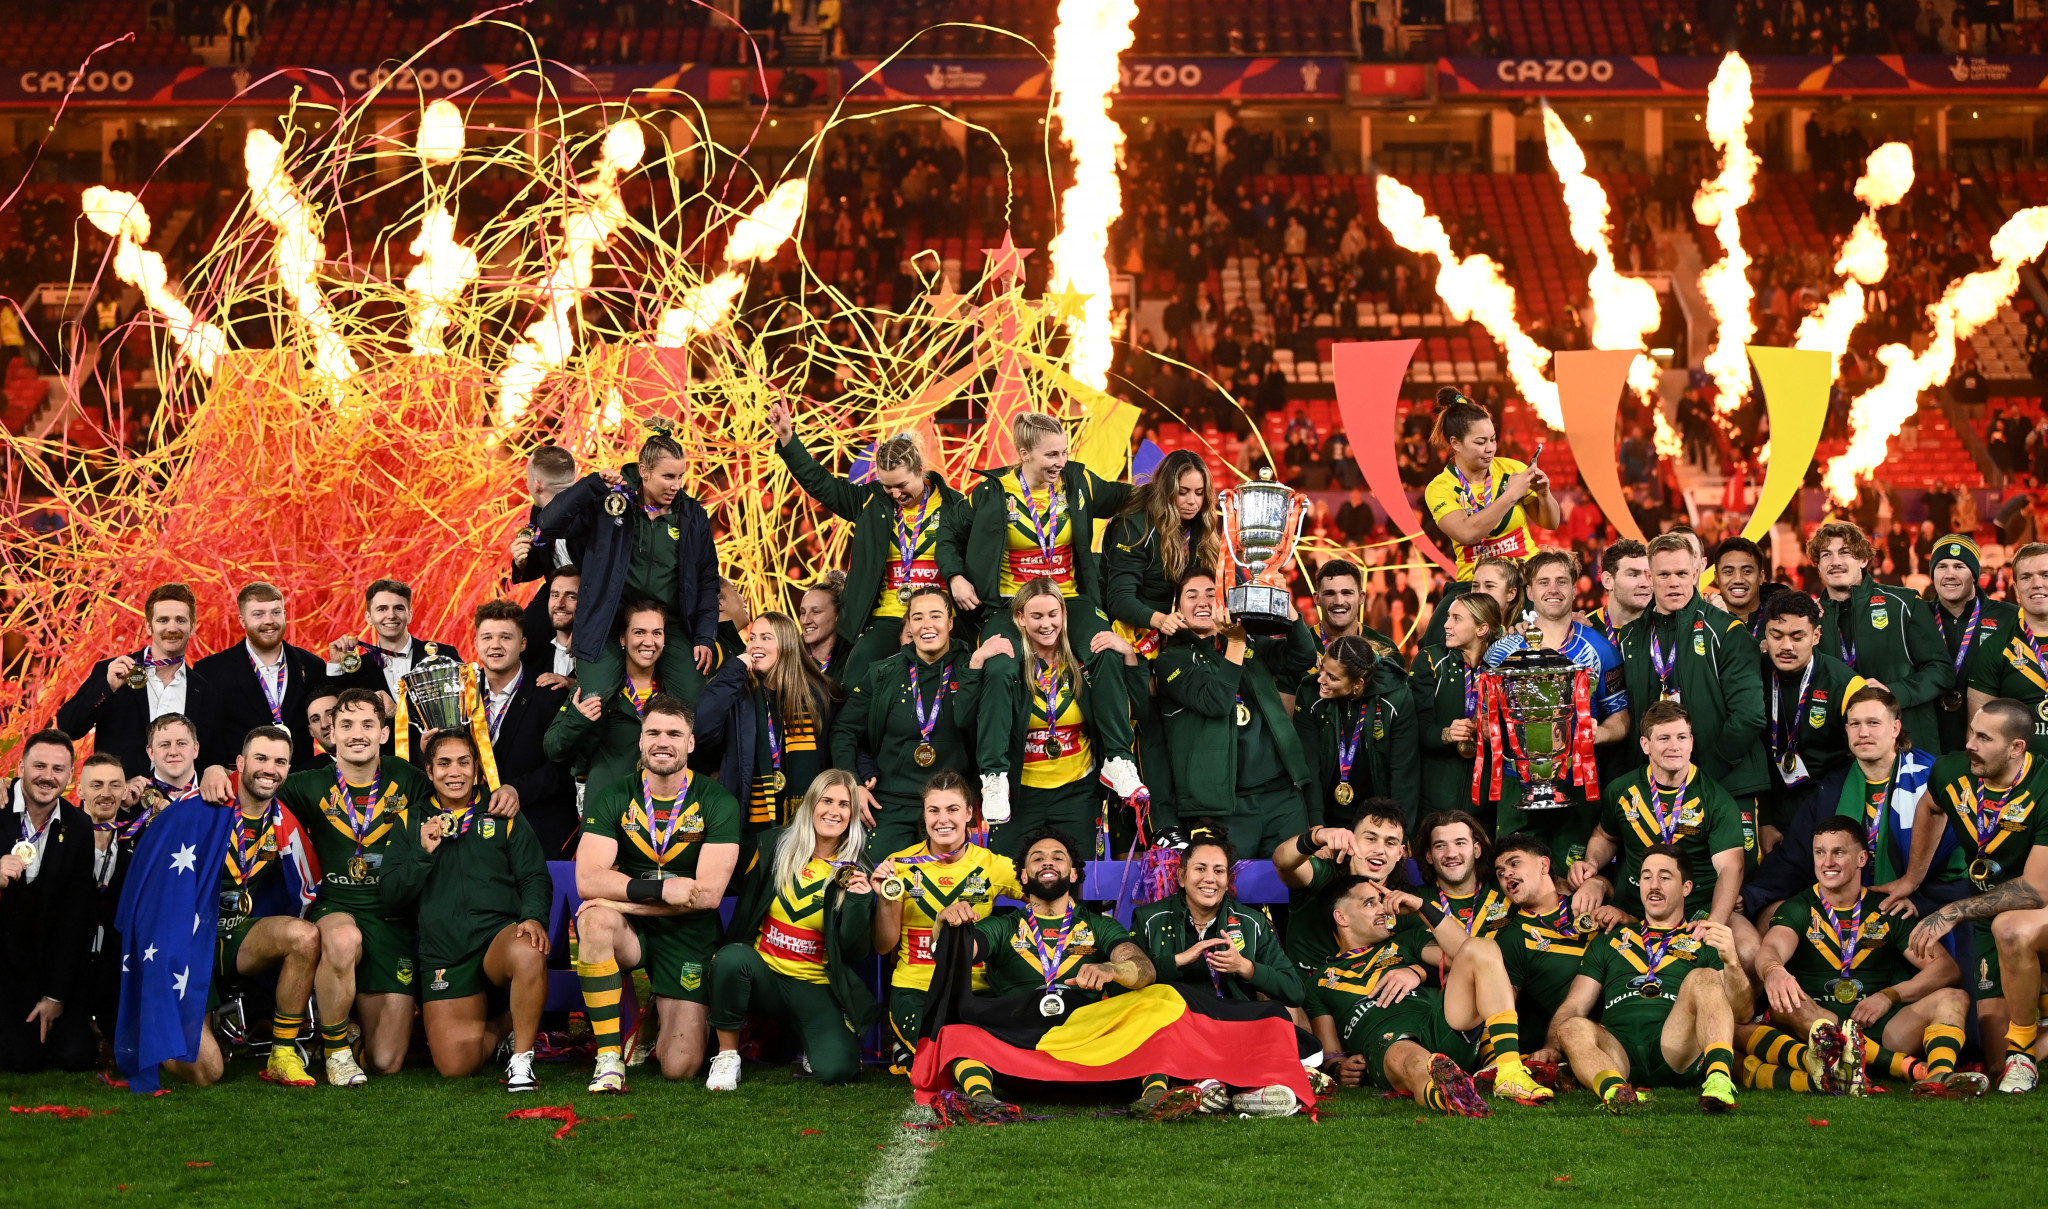 The Australian men's and women's teams celebrating their Rugby League World Cup wins ©Getty Images